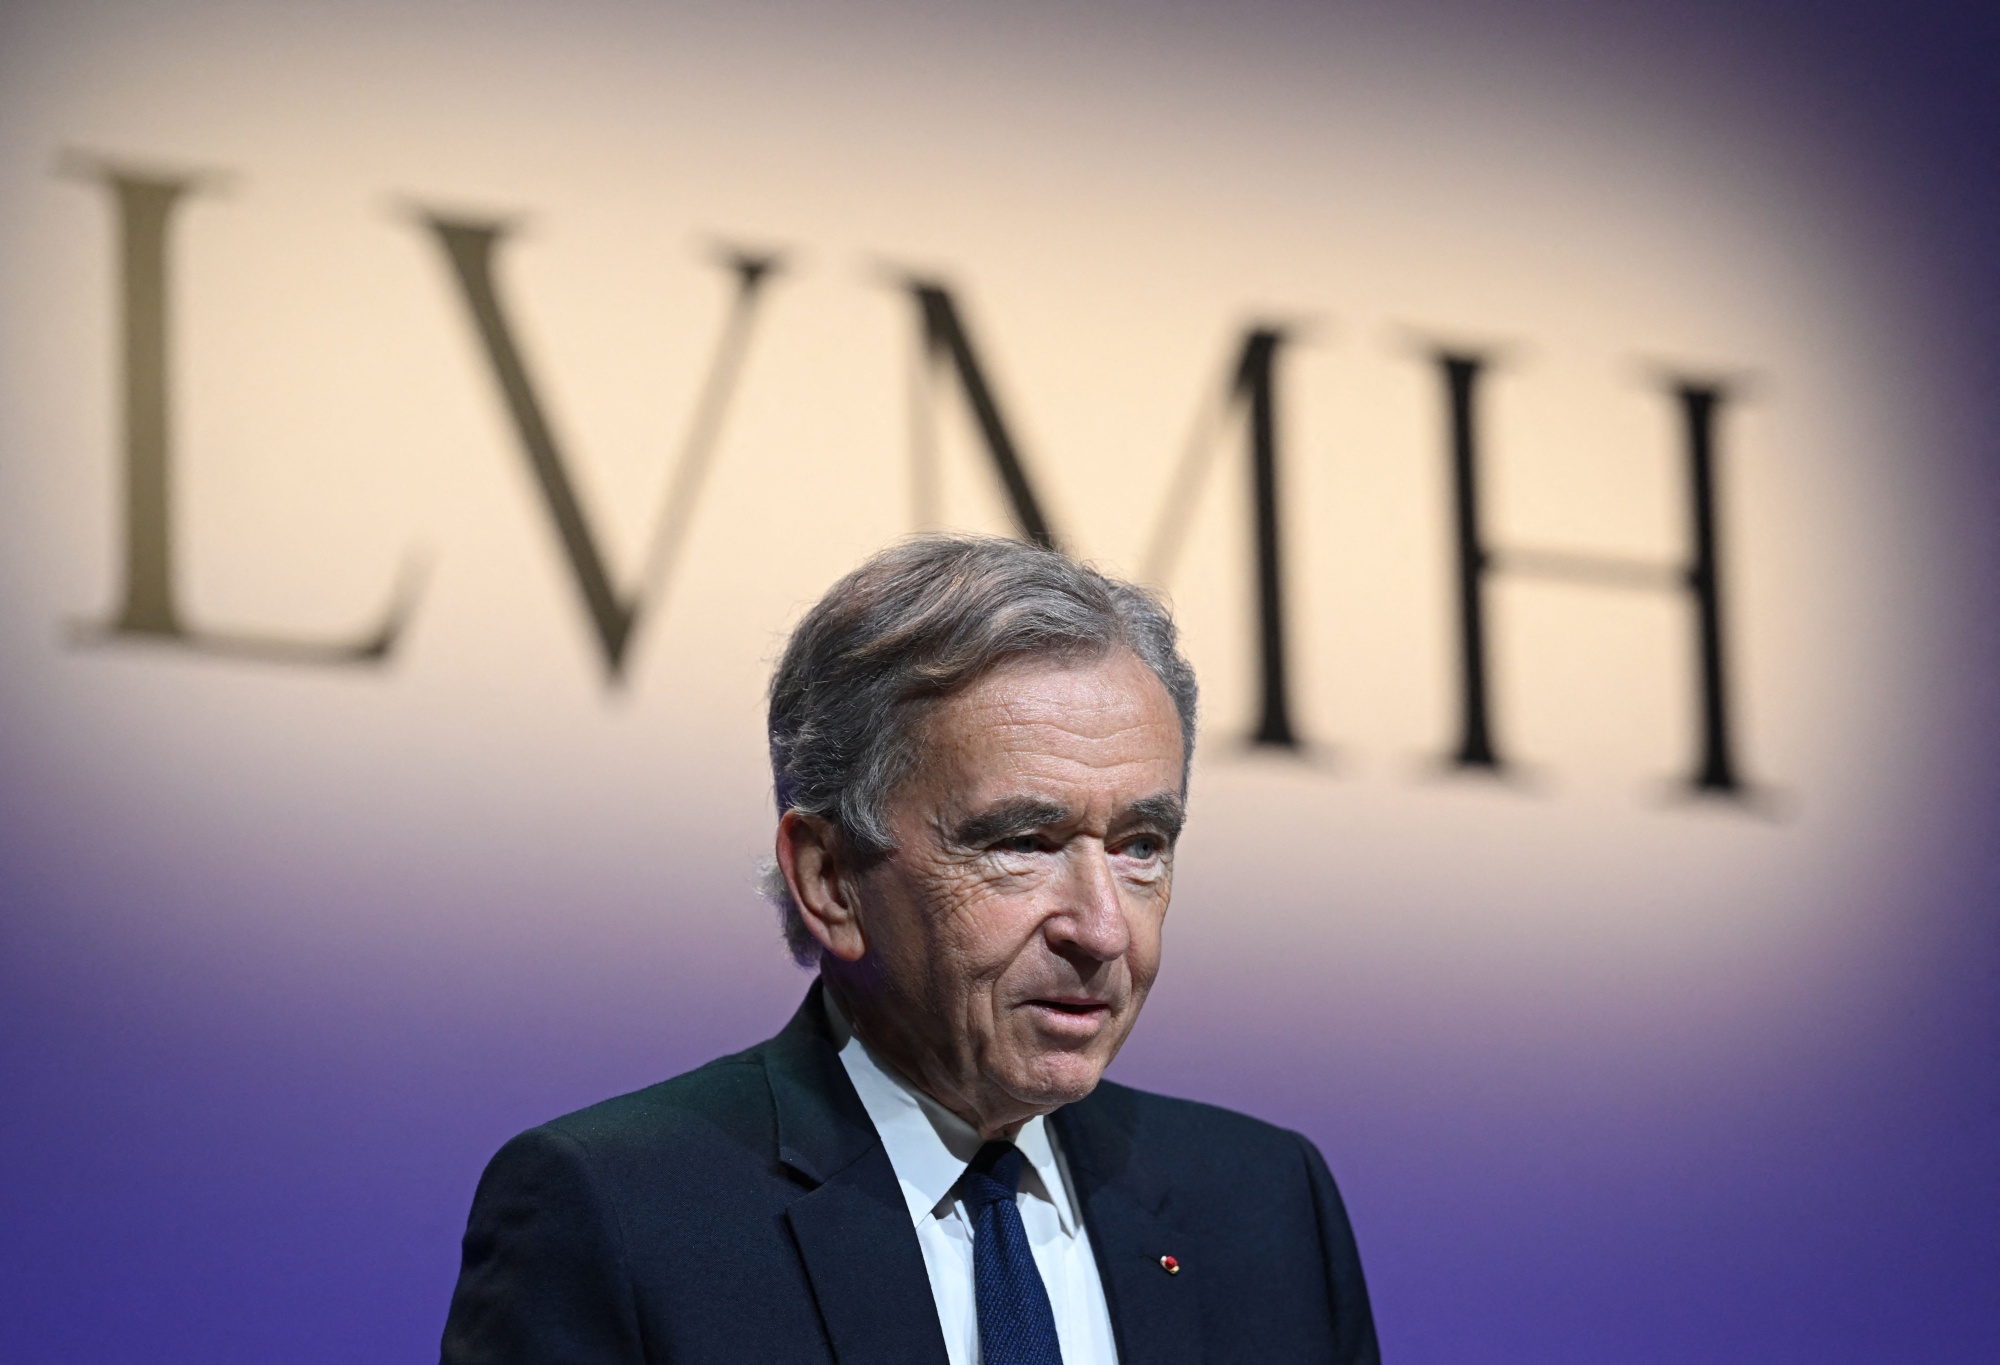 LVMH Is Now First European Company With USD 500 Billion Market Value